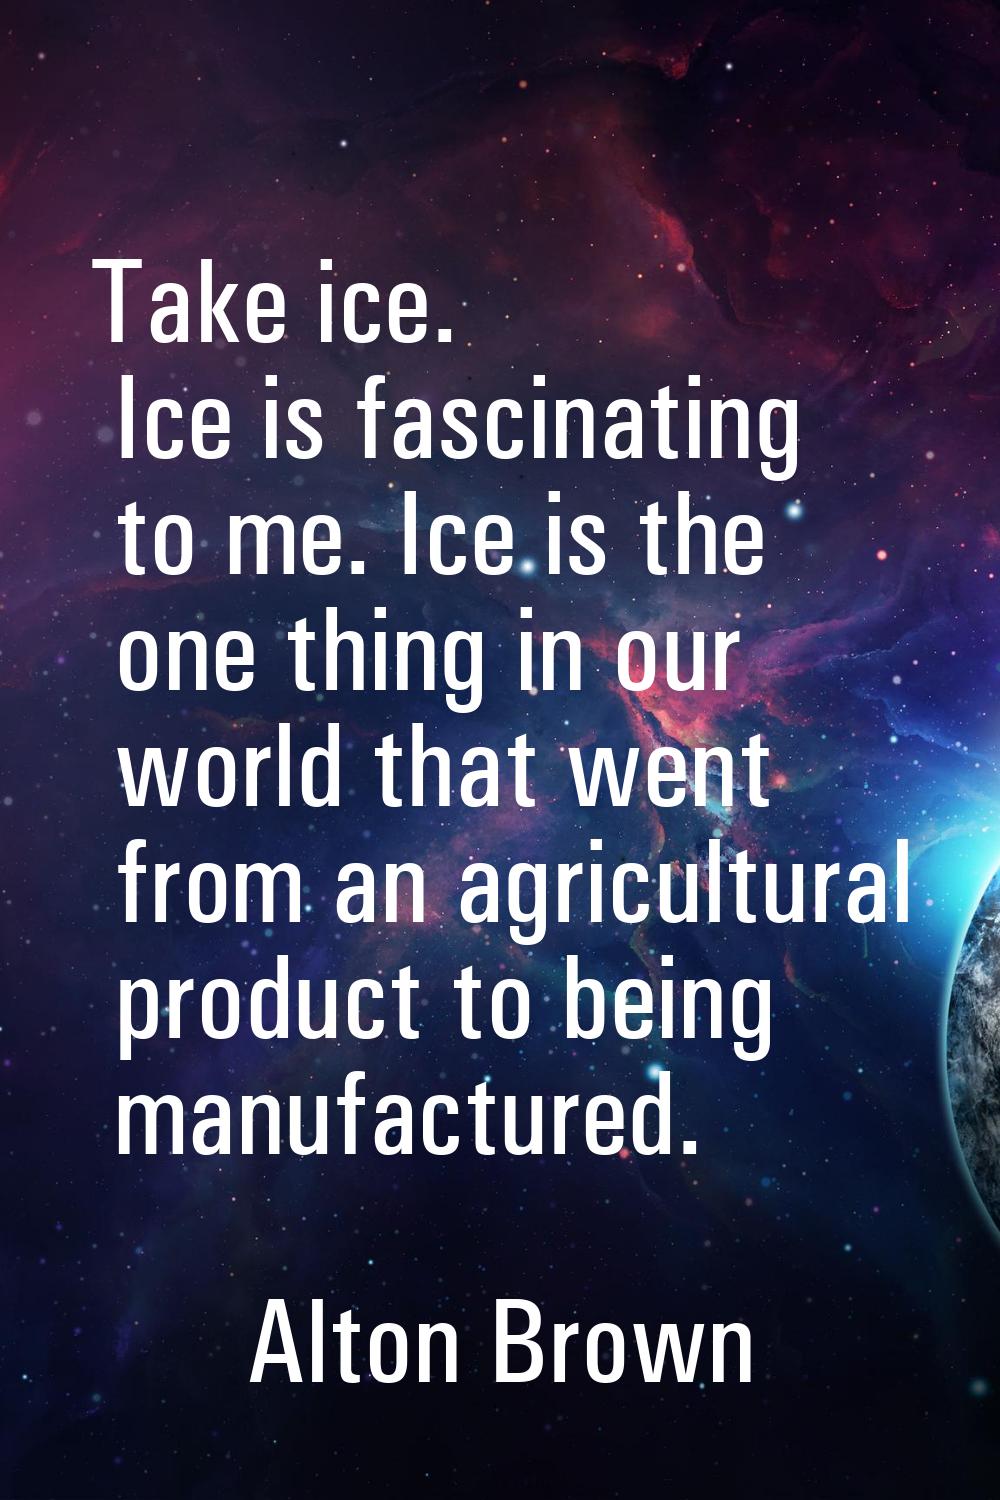 Take ice. Ice is fascinating to me. Ice is the one thing in our world that went from an agricultura